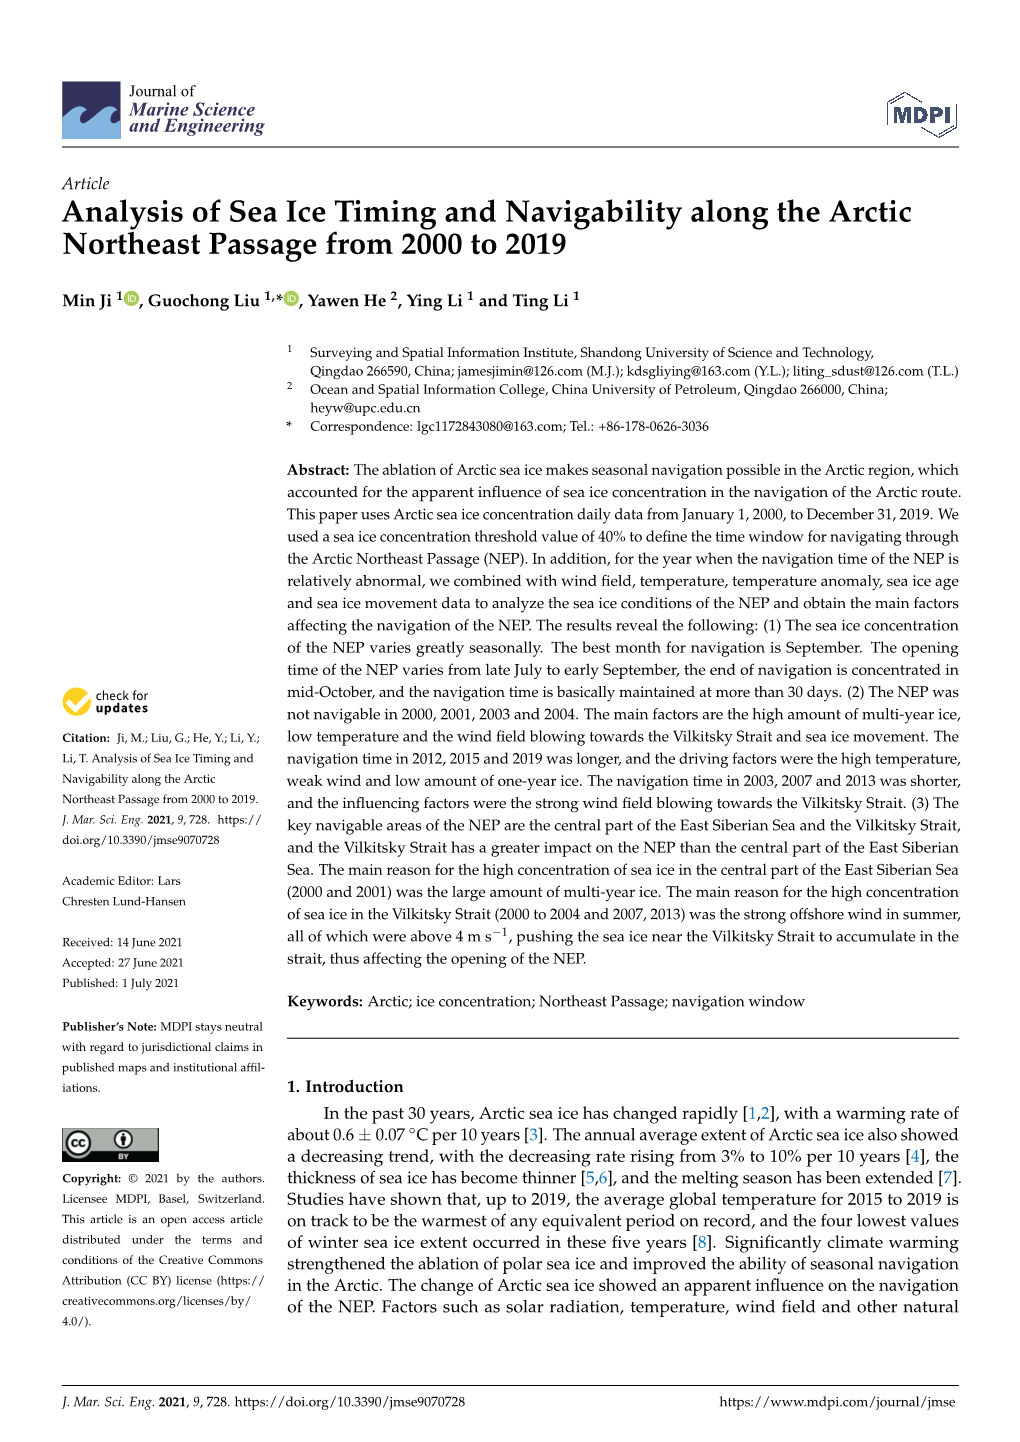 Analysis of Sea Ice Timing and Navigability Along the Arctic Northeast Passage from 2000 to 2019